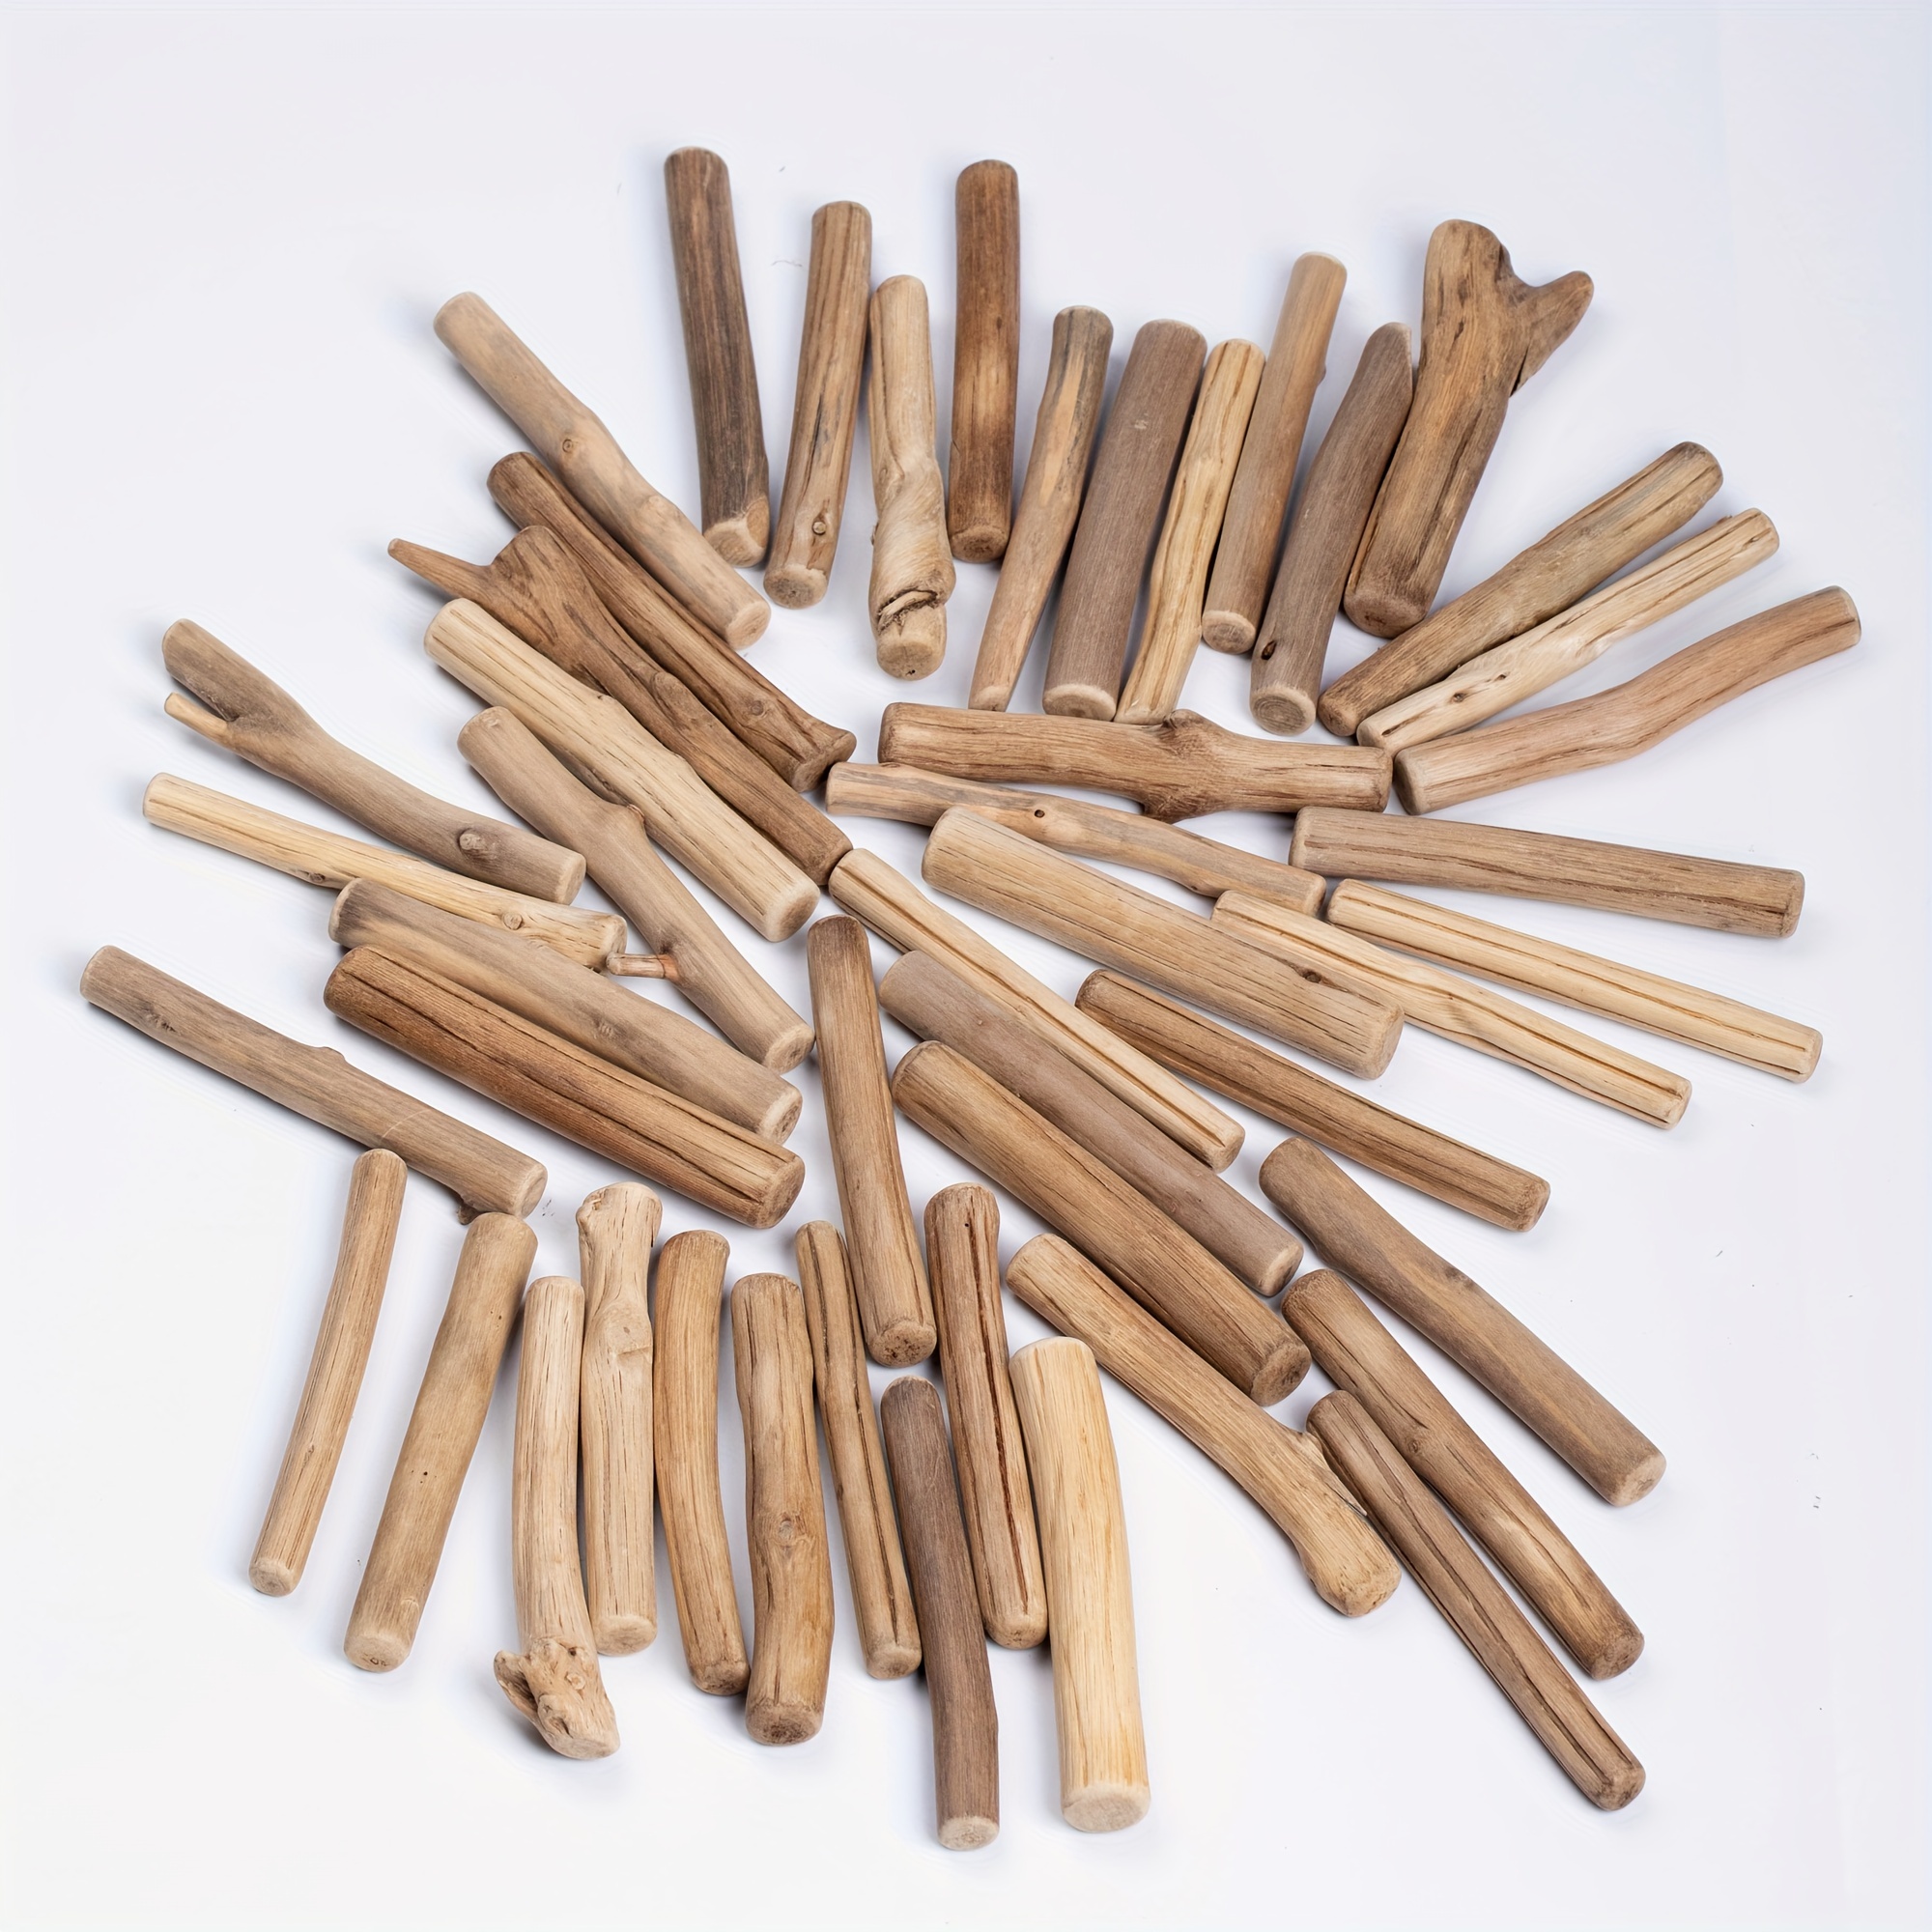 100Pcs 6 Inch Wood Sticks for Crafts, 0.3-0.5 Inch in Diameter Wood Log  Sticks, Natural Mini Twigs Sticks for Photo Props, DIY Crafts, Home